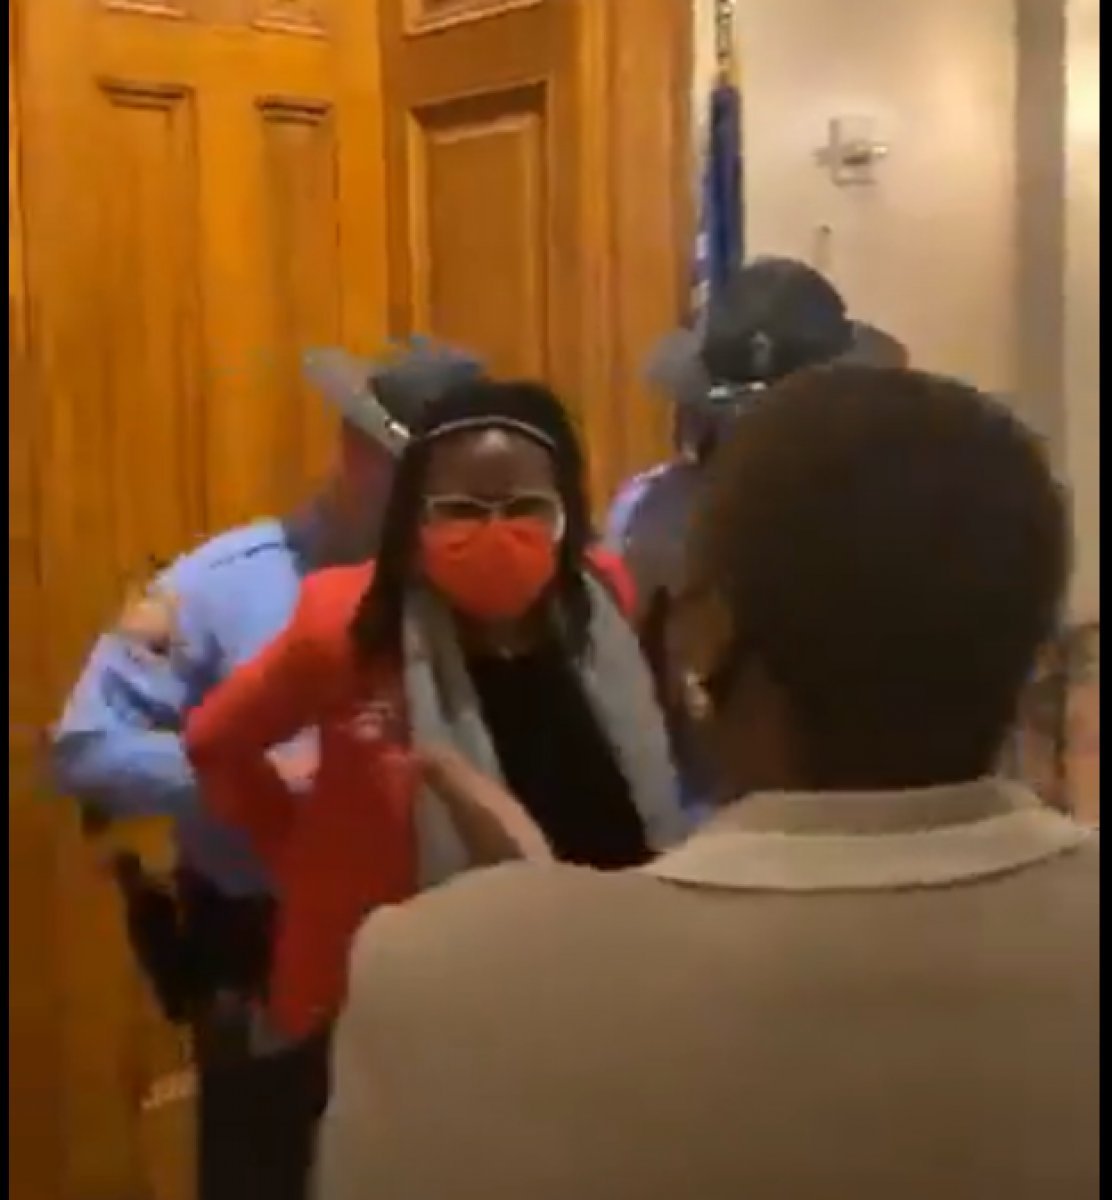 Reverse handcuffs to black lawmaker going to the governor's office in the USA #4